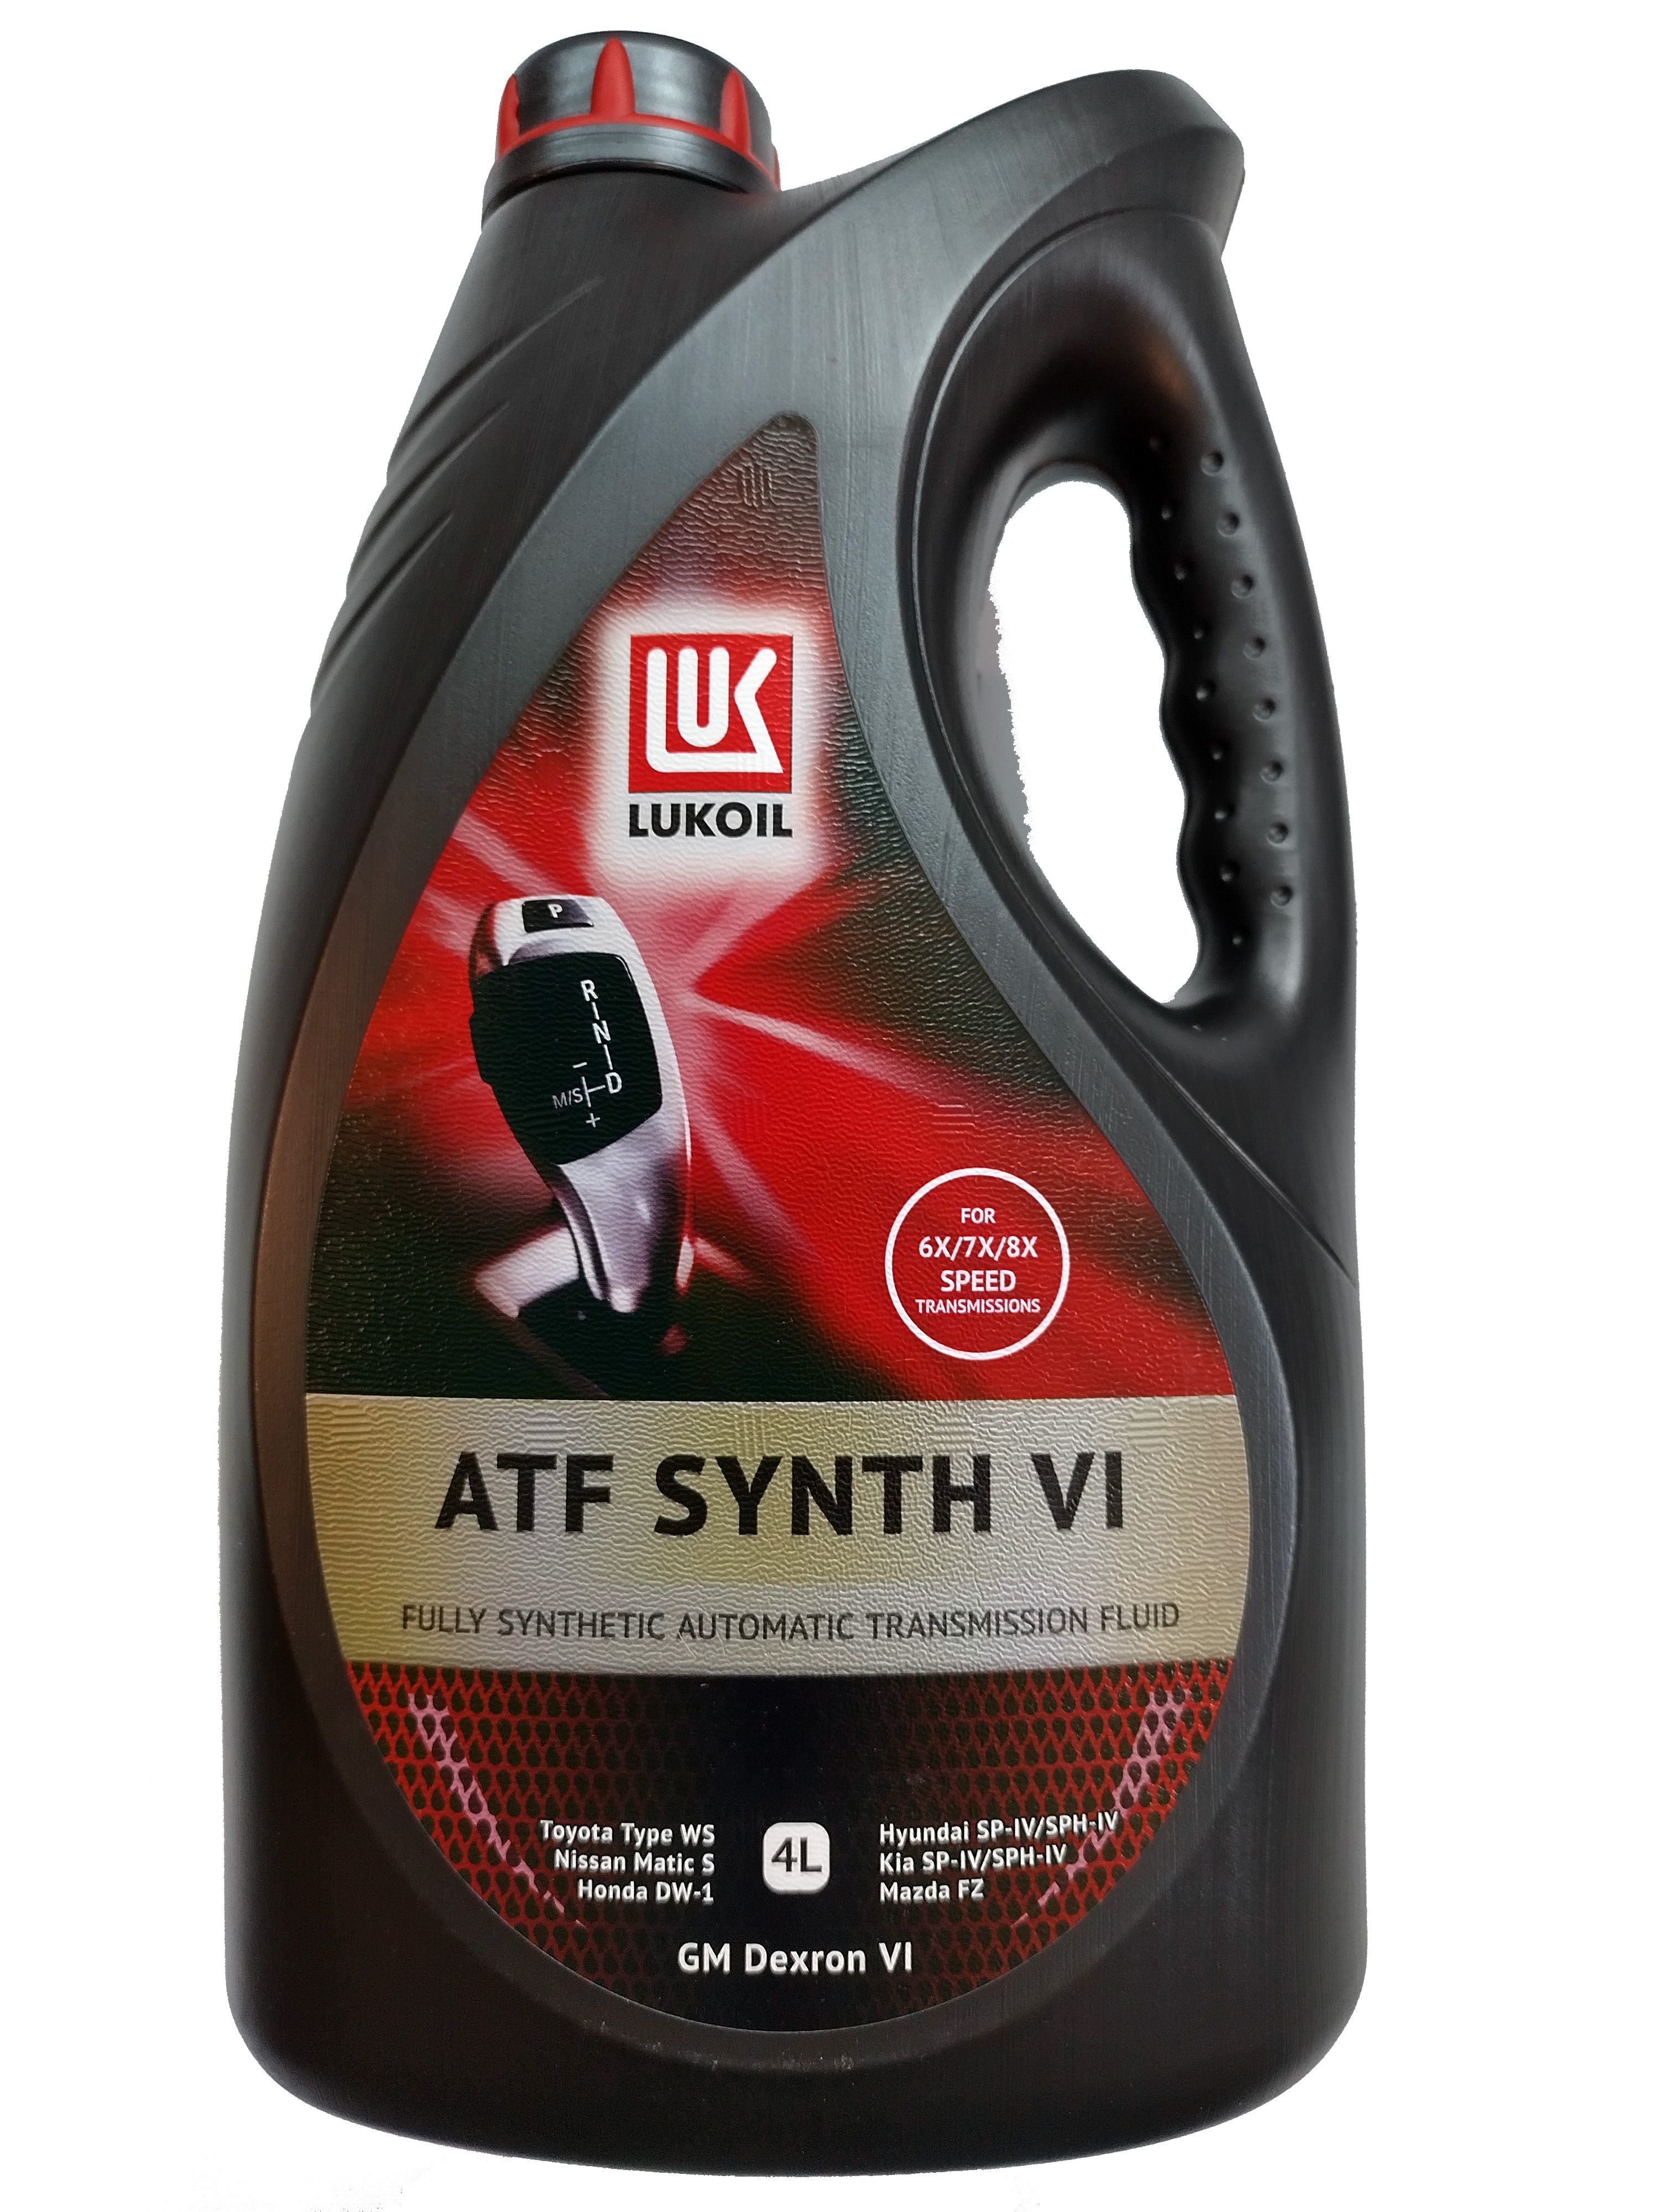 Масло лукойл atf synth. Лукойл ATF Synth vi. Масло Лукойл АТФ декстрон 6 4л. Lukoil ATF Synth 6 216. Лукойл ATF Synth Multi 4л.